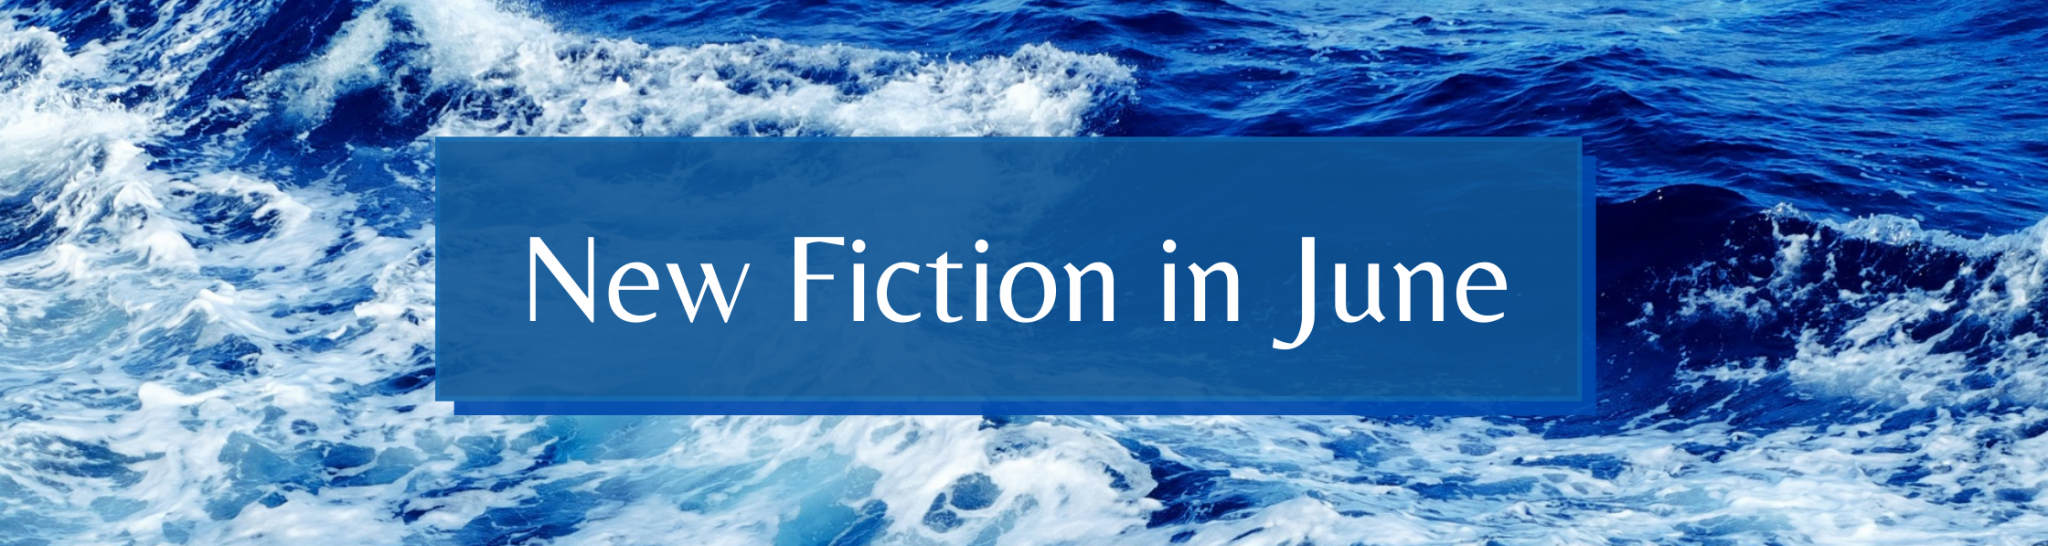 New fiction in June